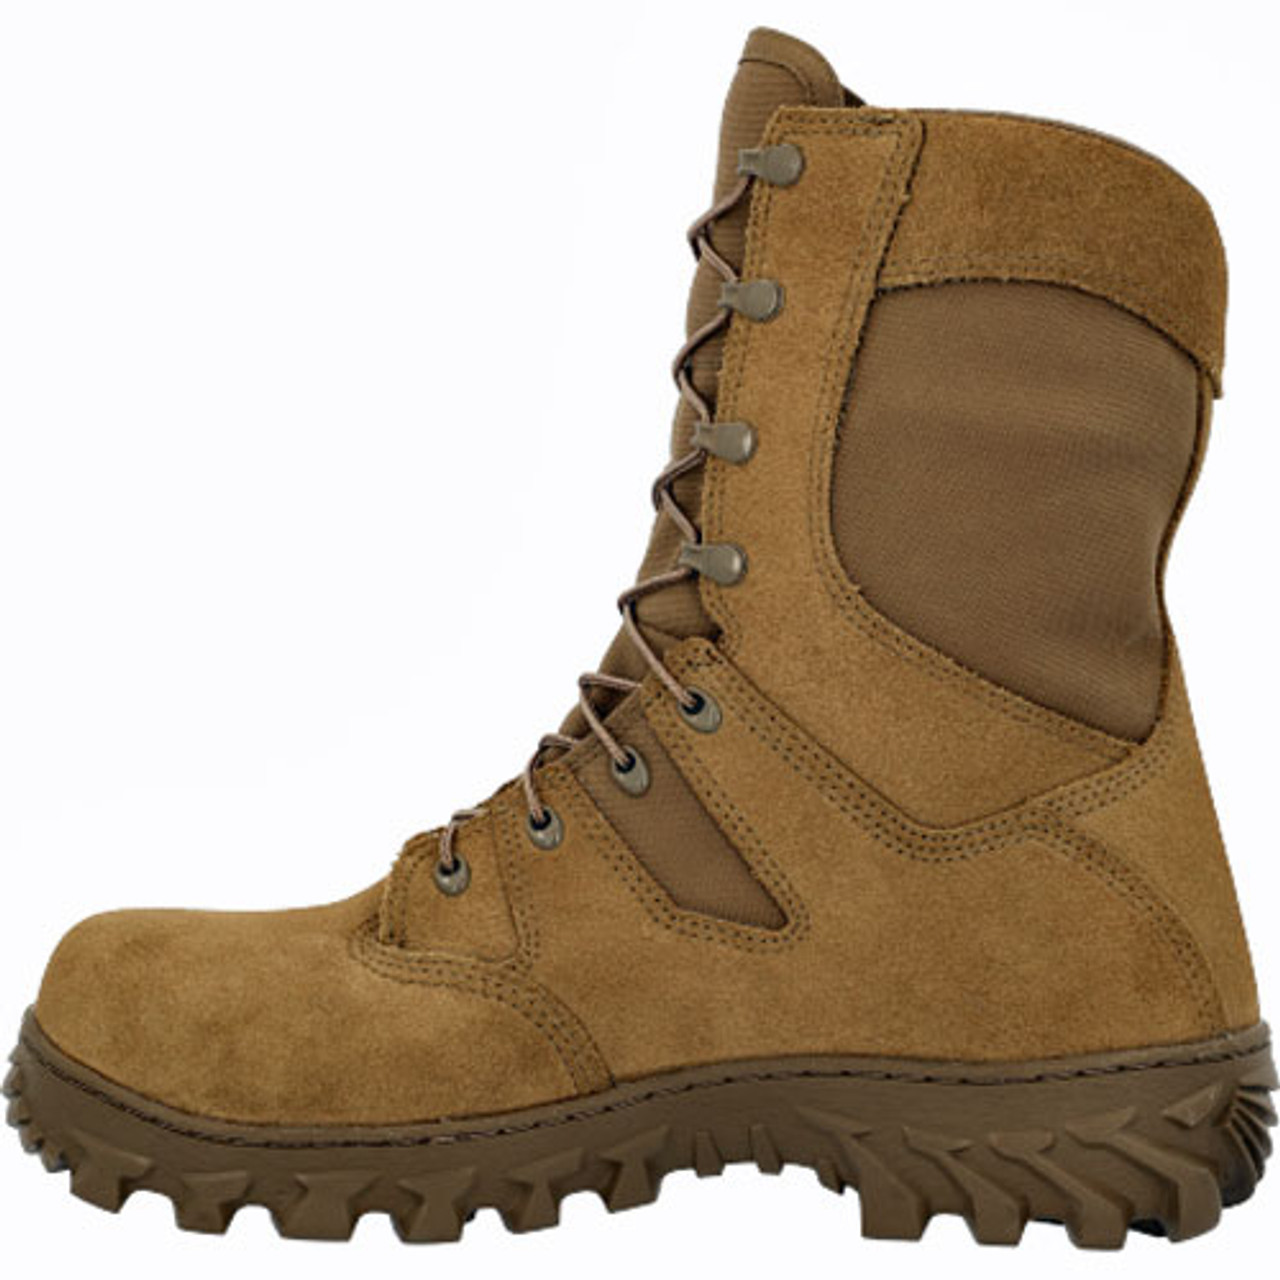 Rocky S2V Predator 400g Insulated Military Boot Coyote Brown